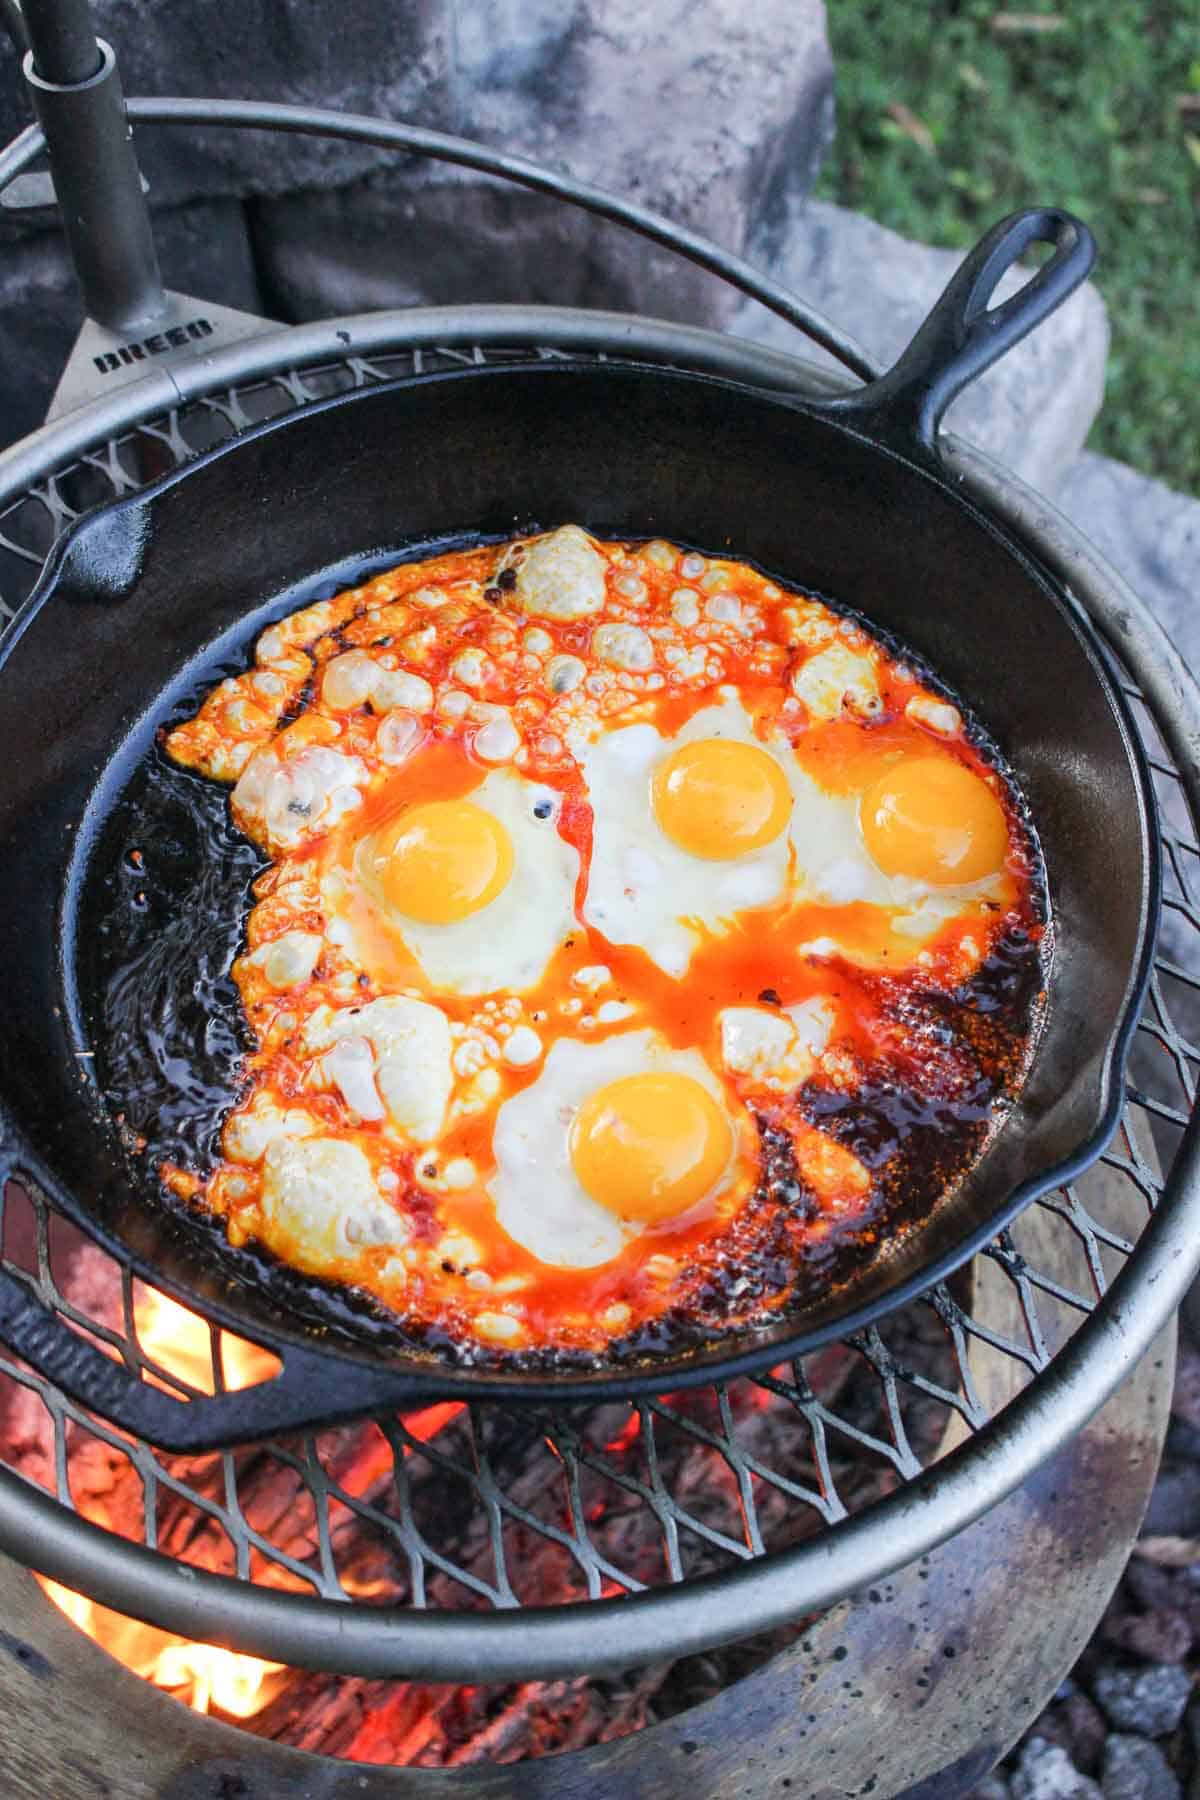 chili oil fried eggs in a skillet on the grill